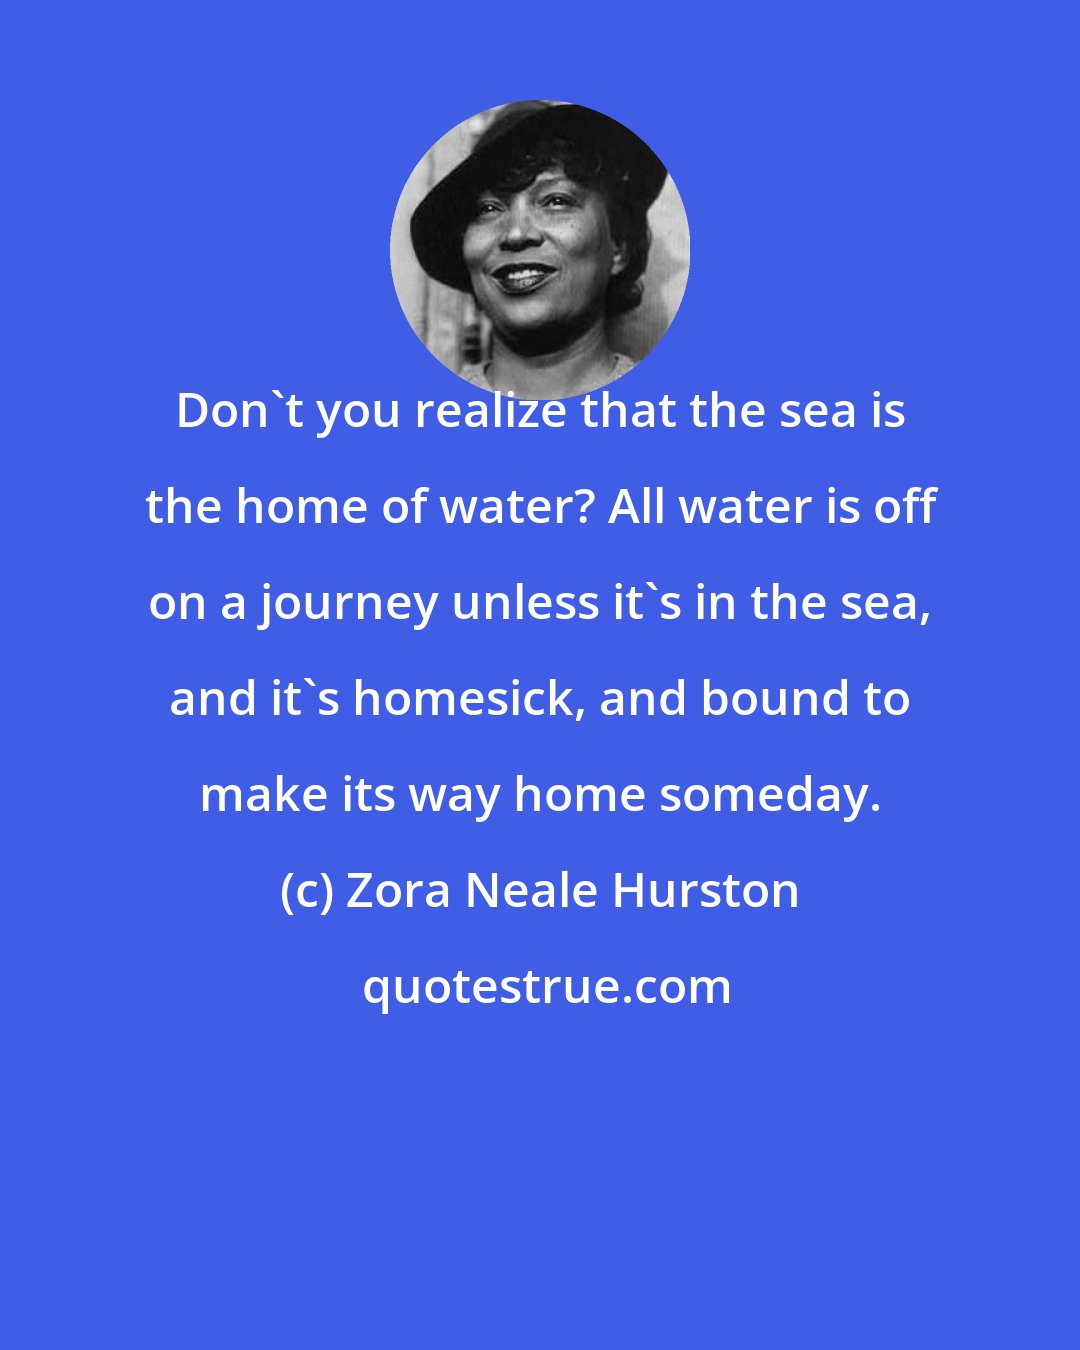 Zora Neale Hurston: Don't you realize that the sea is the home of water? All water is off on a journey unless it's in the sea, and it's homesick, and bound to make its way home someday.